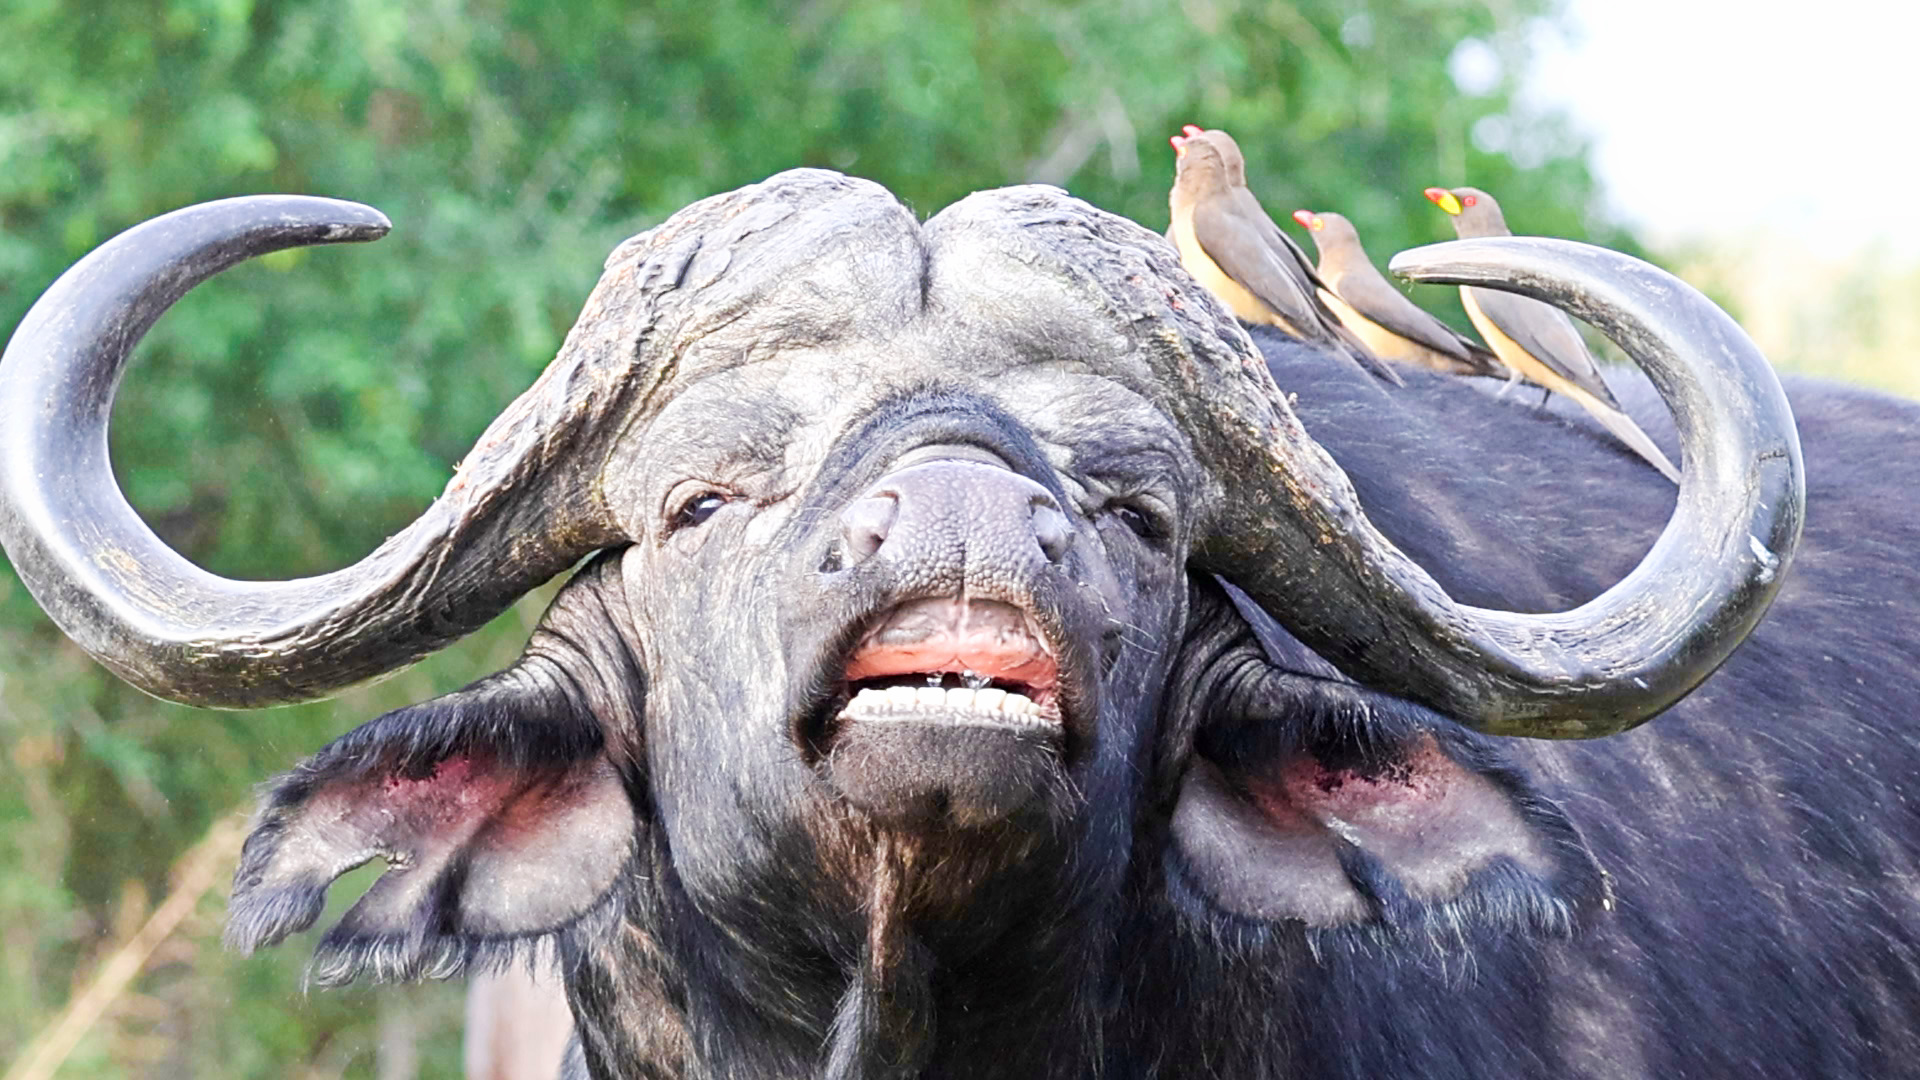 Buffalo are known for their unpredictable behavior and can become very aggressive when threatened. When they feel endangered, they often charge at predators and humans alike, using their sharp, curved horns as weapons. Consequently, their aggressive nature makes them one of the most dangerous animals to encounter in Africa.